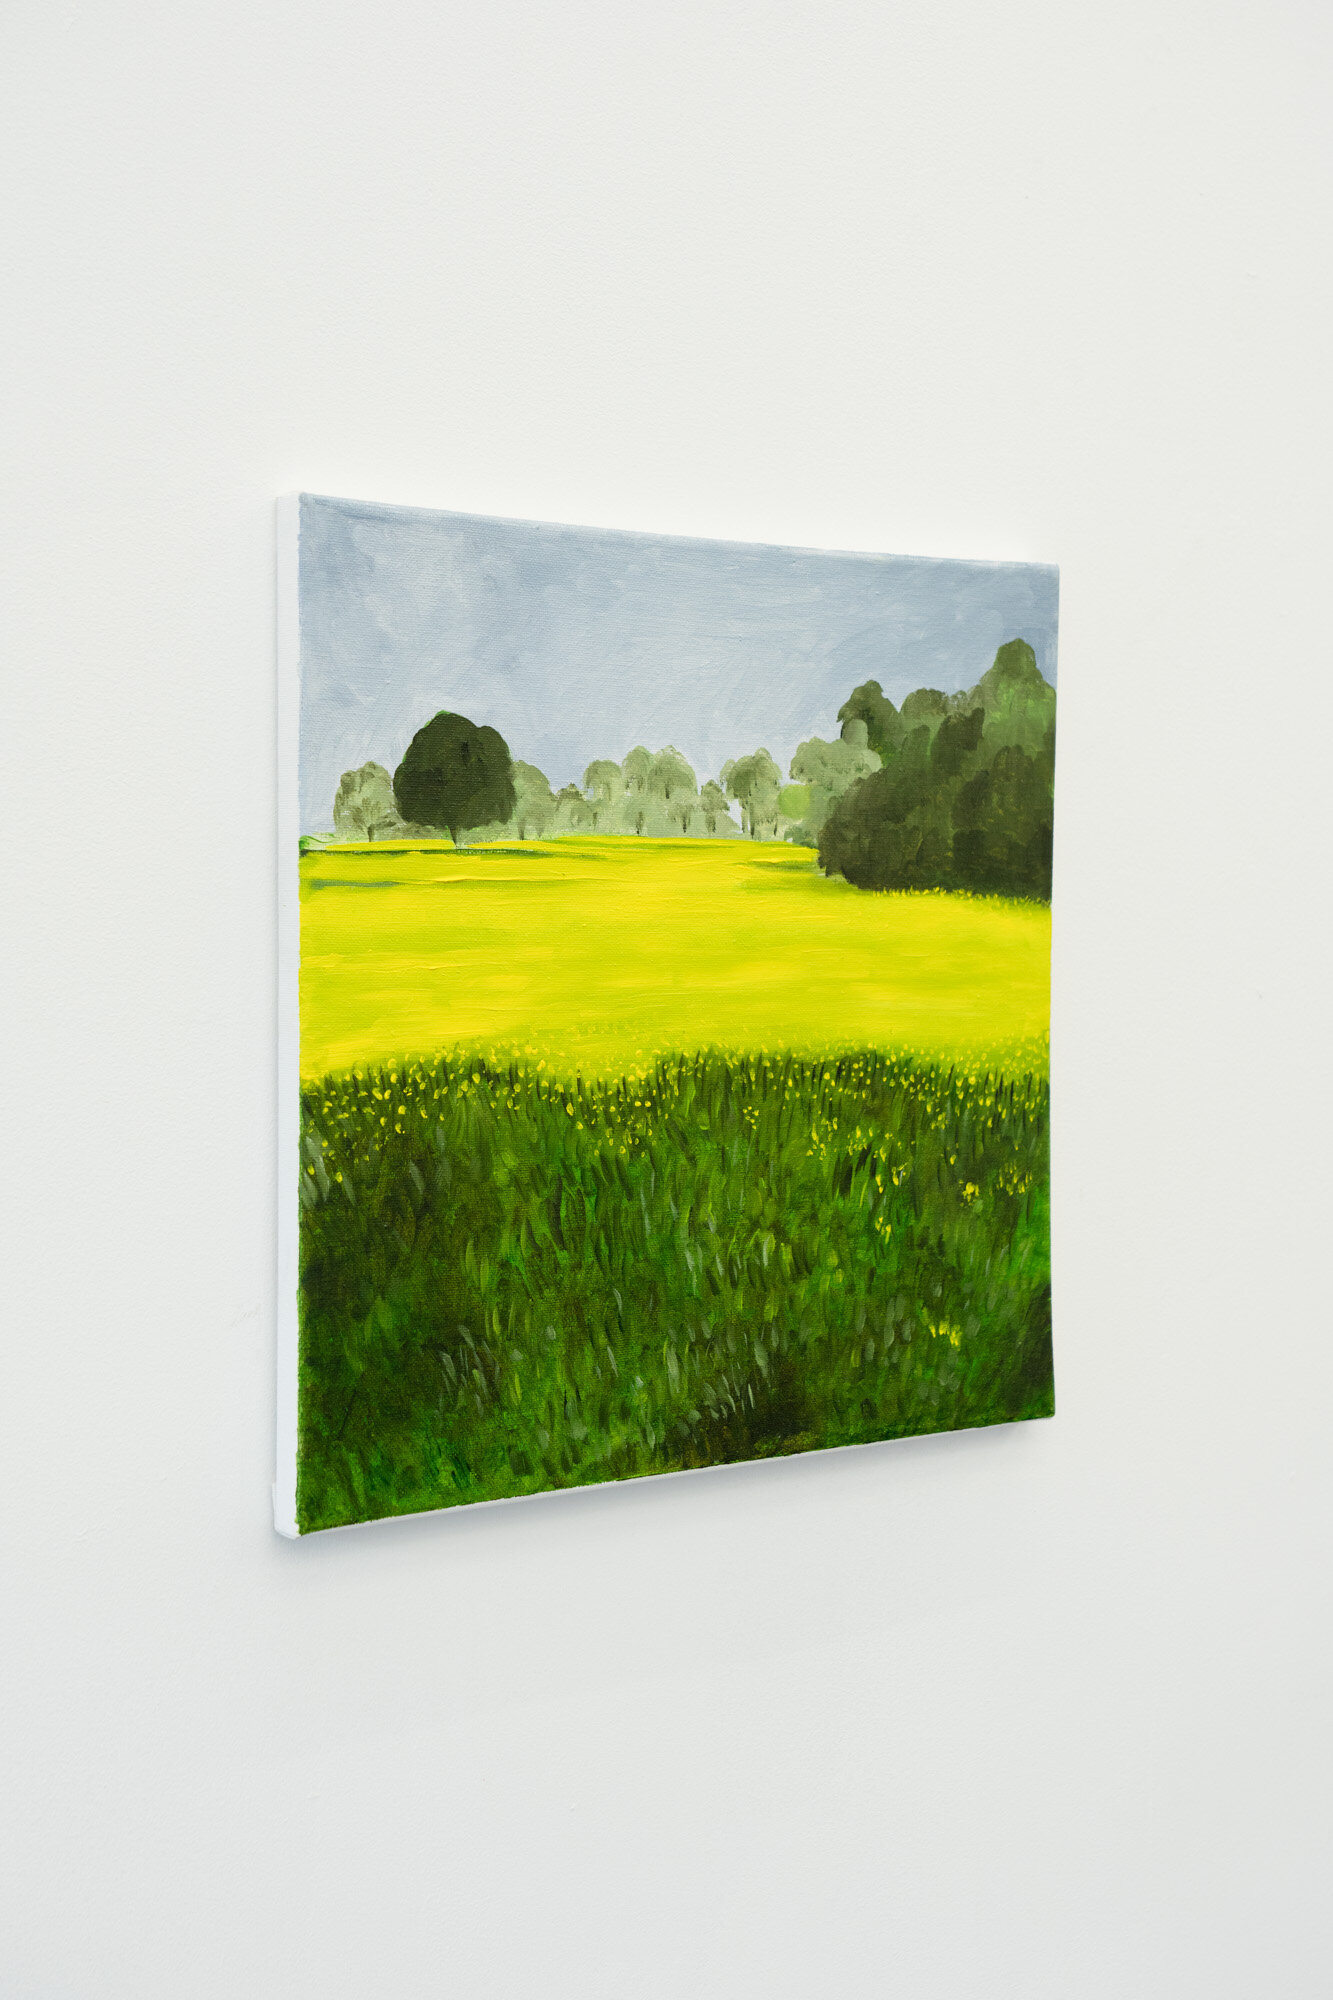  Shana Sharp  Spring Meadow , 2019 Oil on canvas 14 x 14 inches 